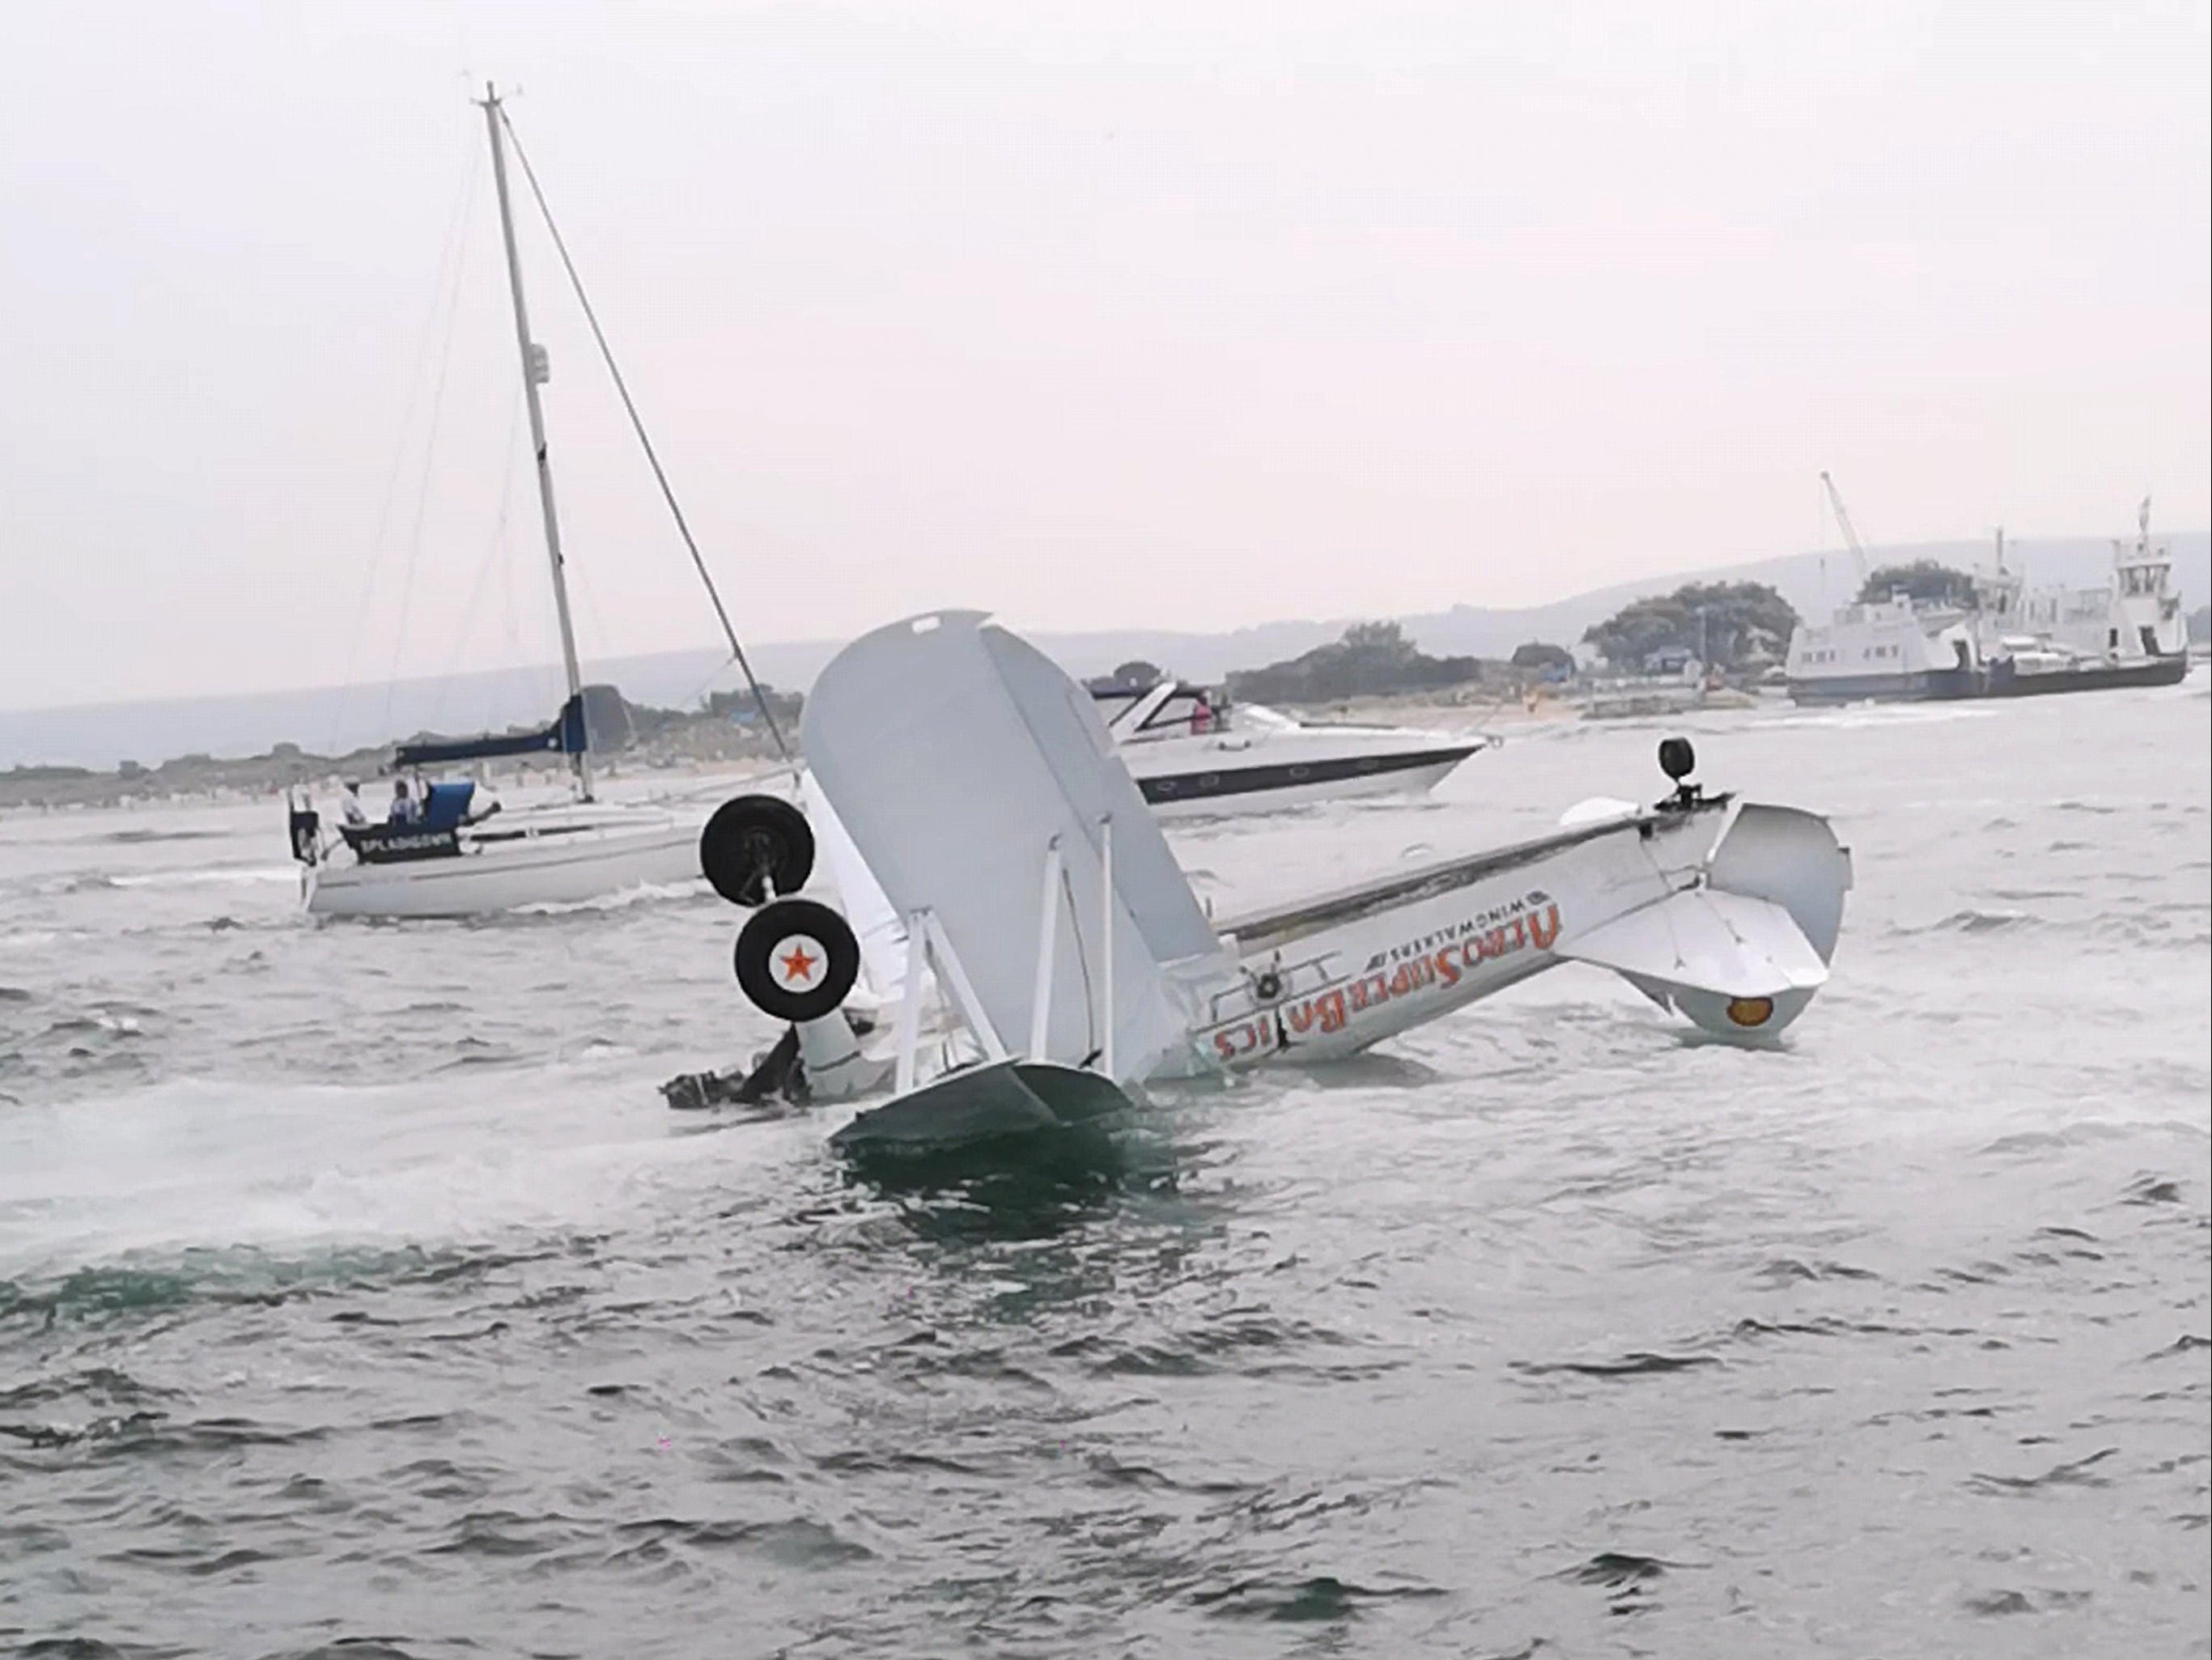 Eyewitnesses saw the two-seat biplane crash down in Poole Harbour, near Bournemouth, on Saturday afternoon